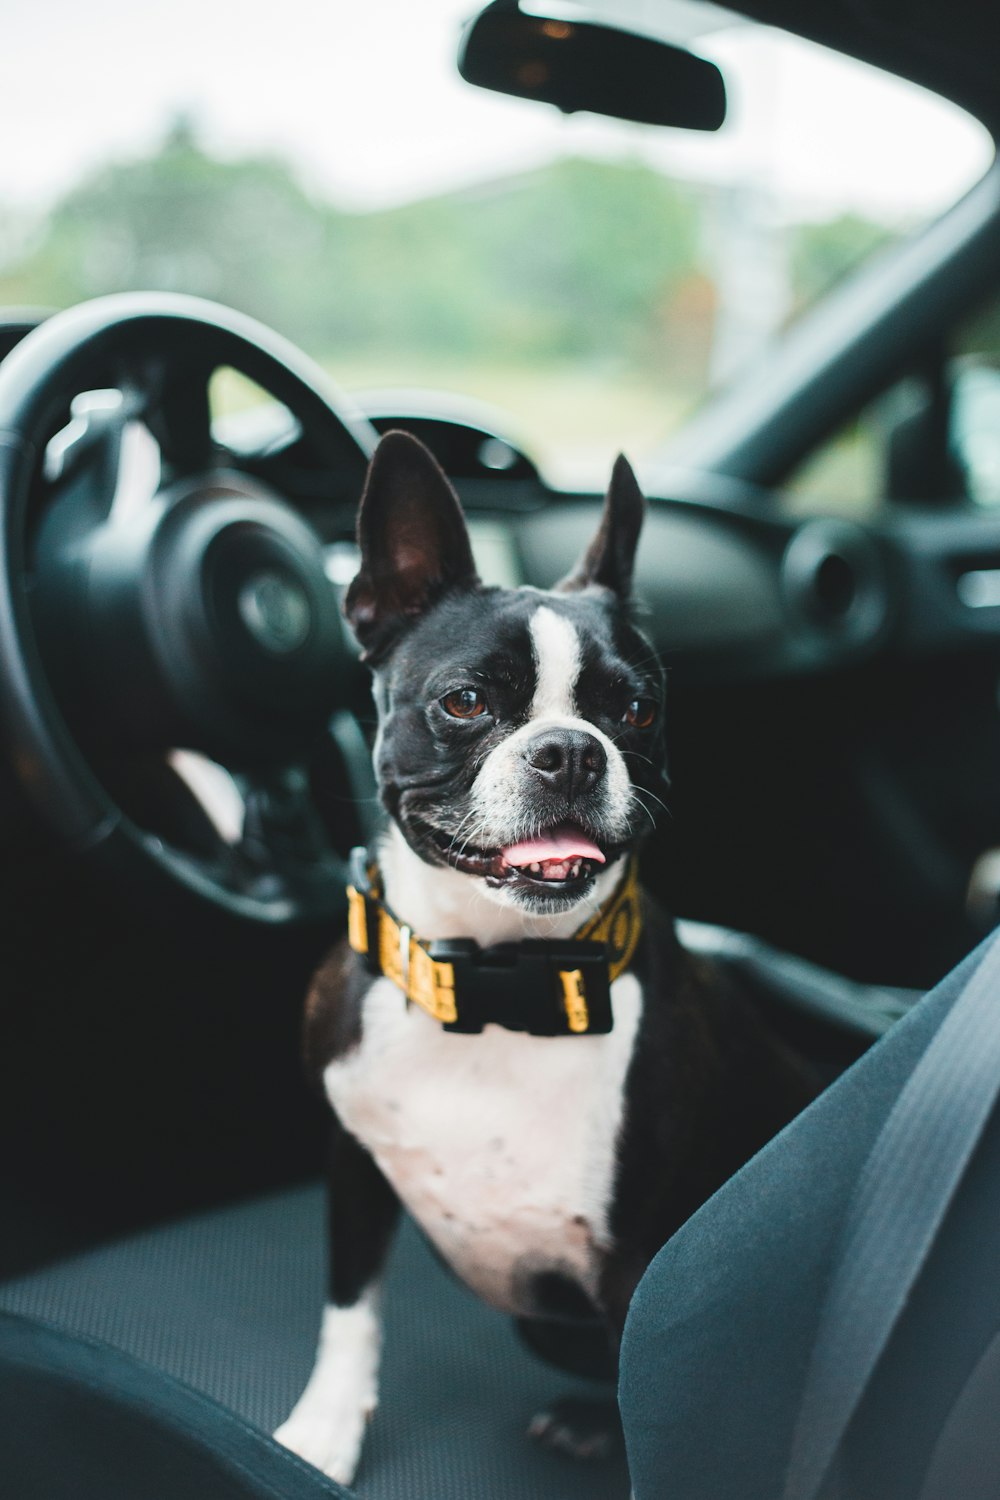 black and white short coated dog in car